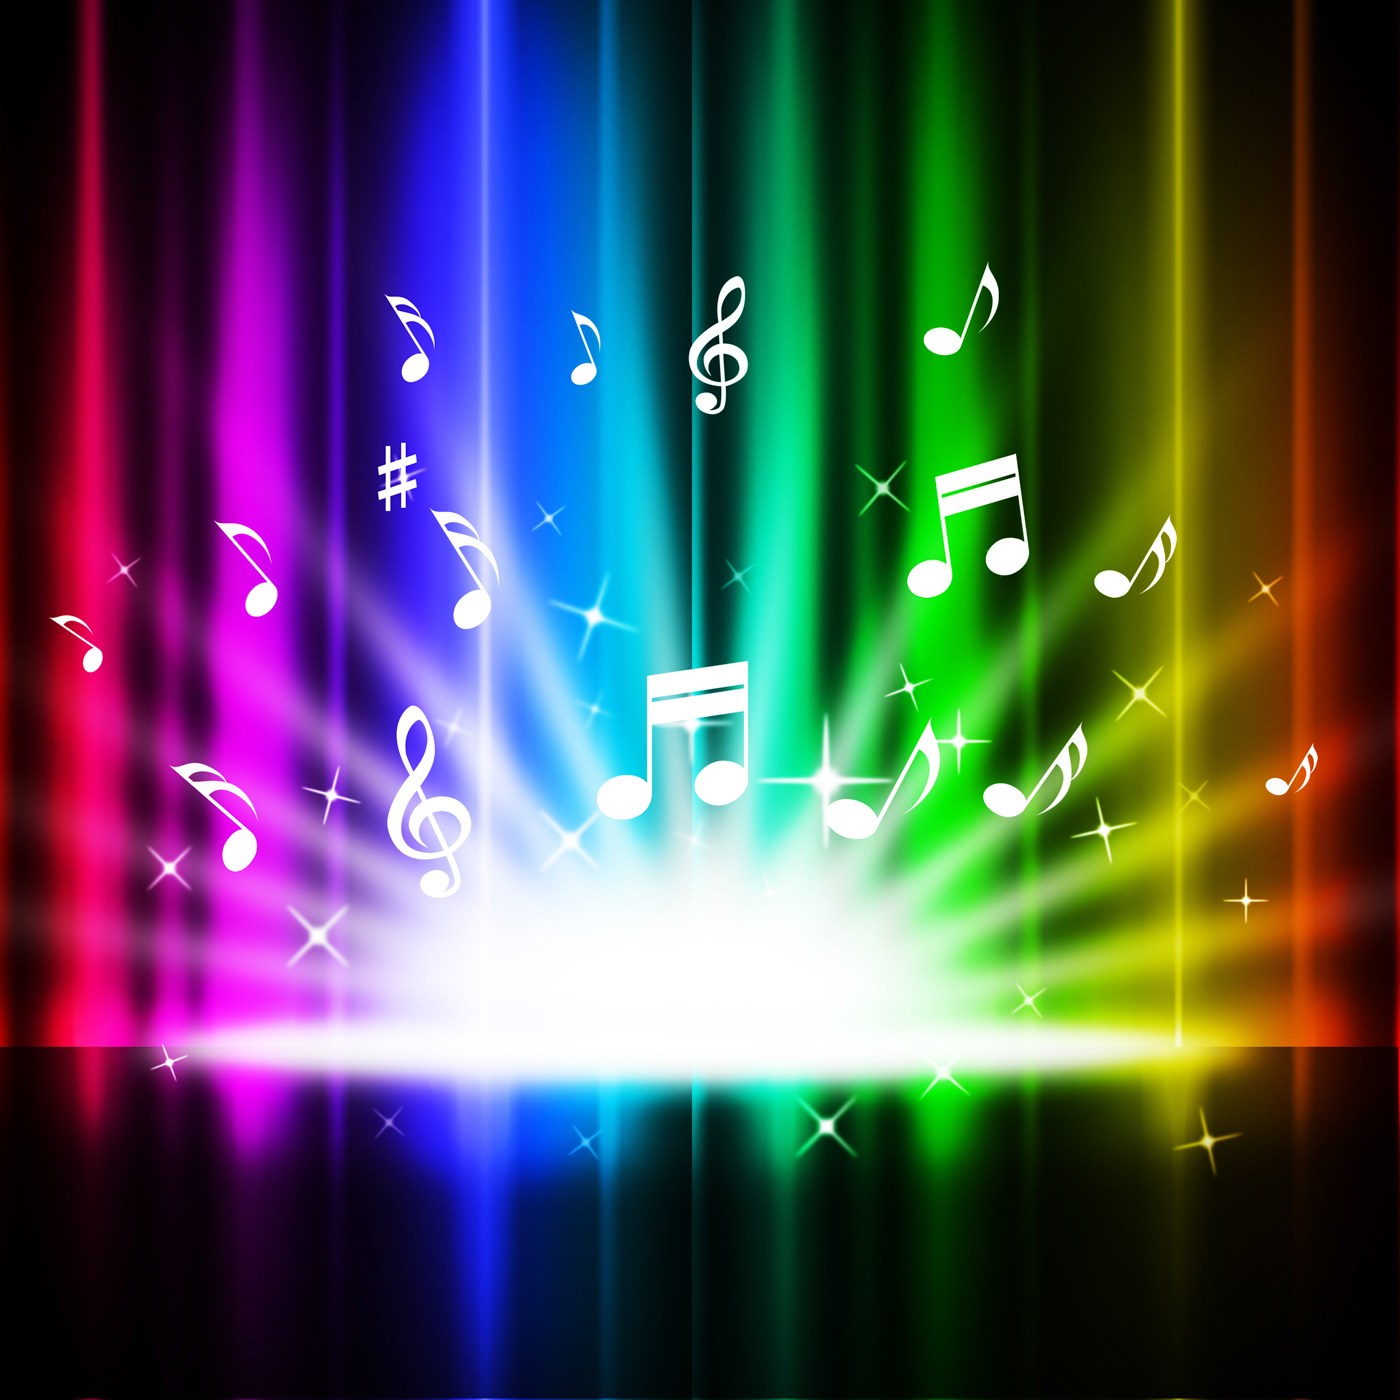 Rainbow curtains background means music songs and stage photo